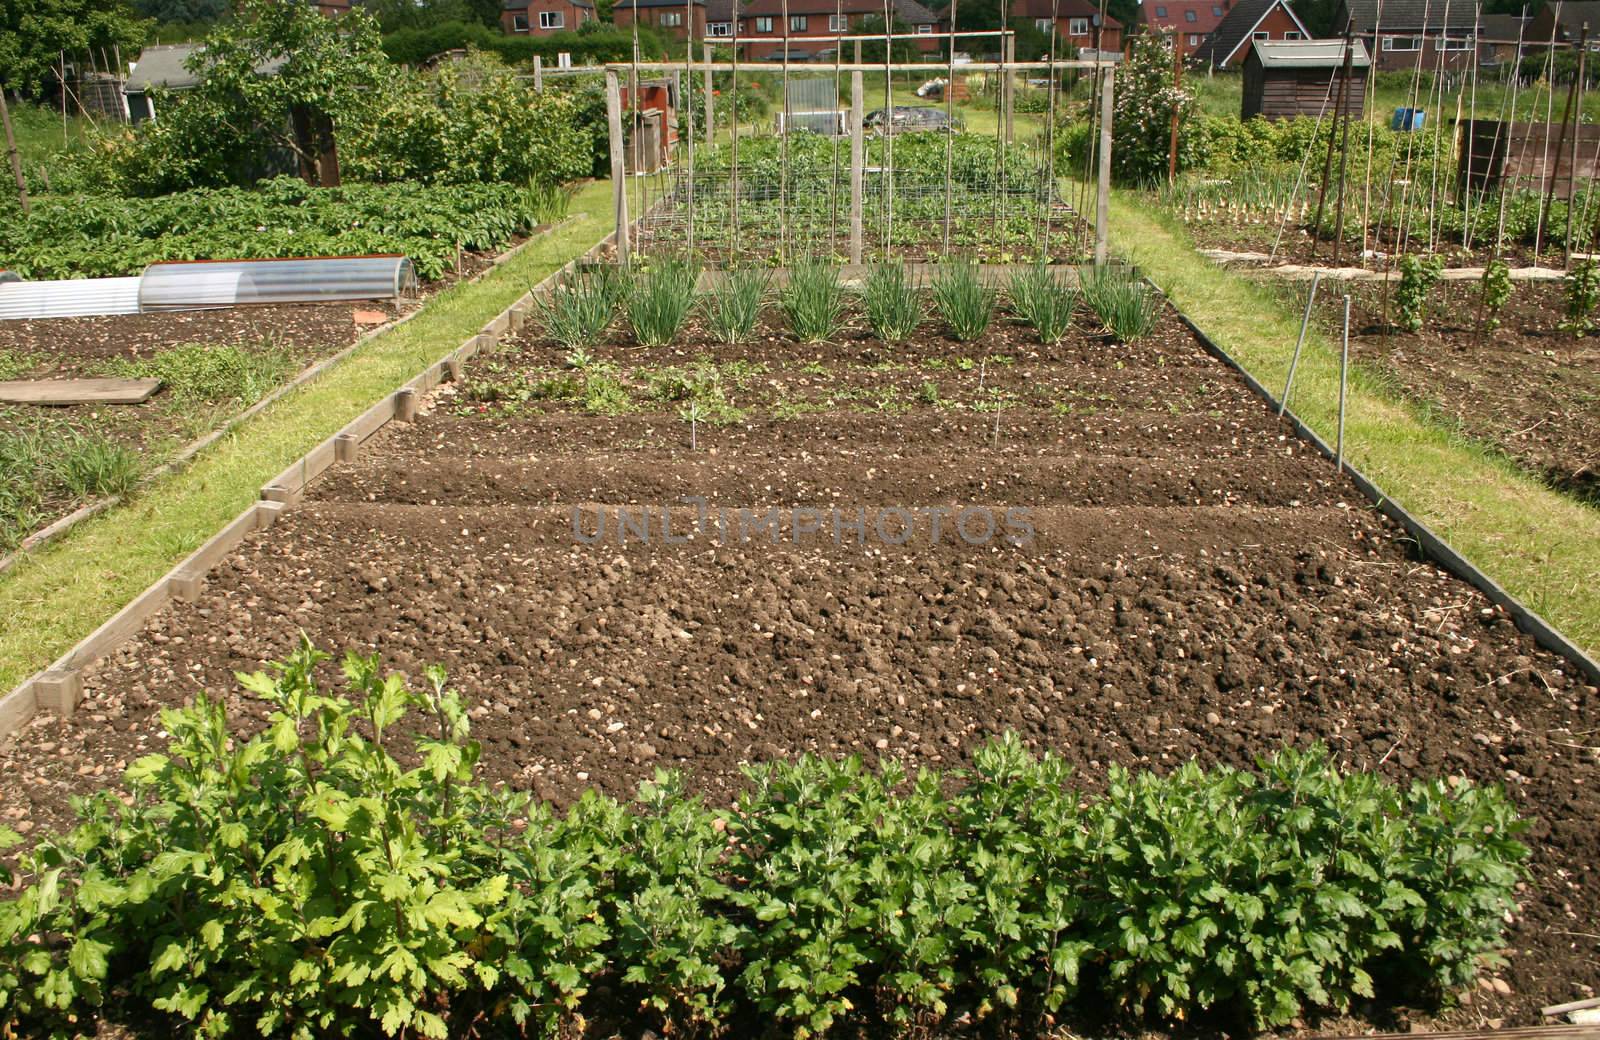 well kept allotment plot with vegetables and plants